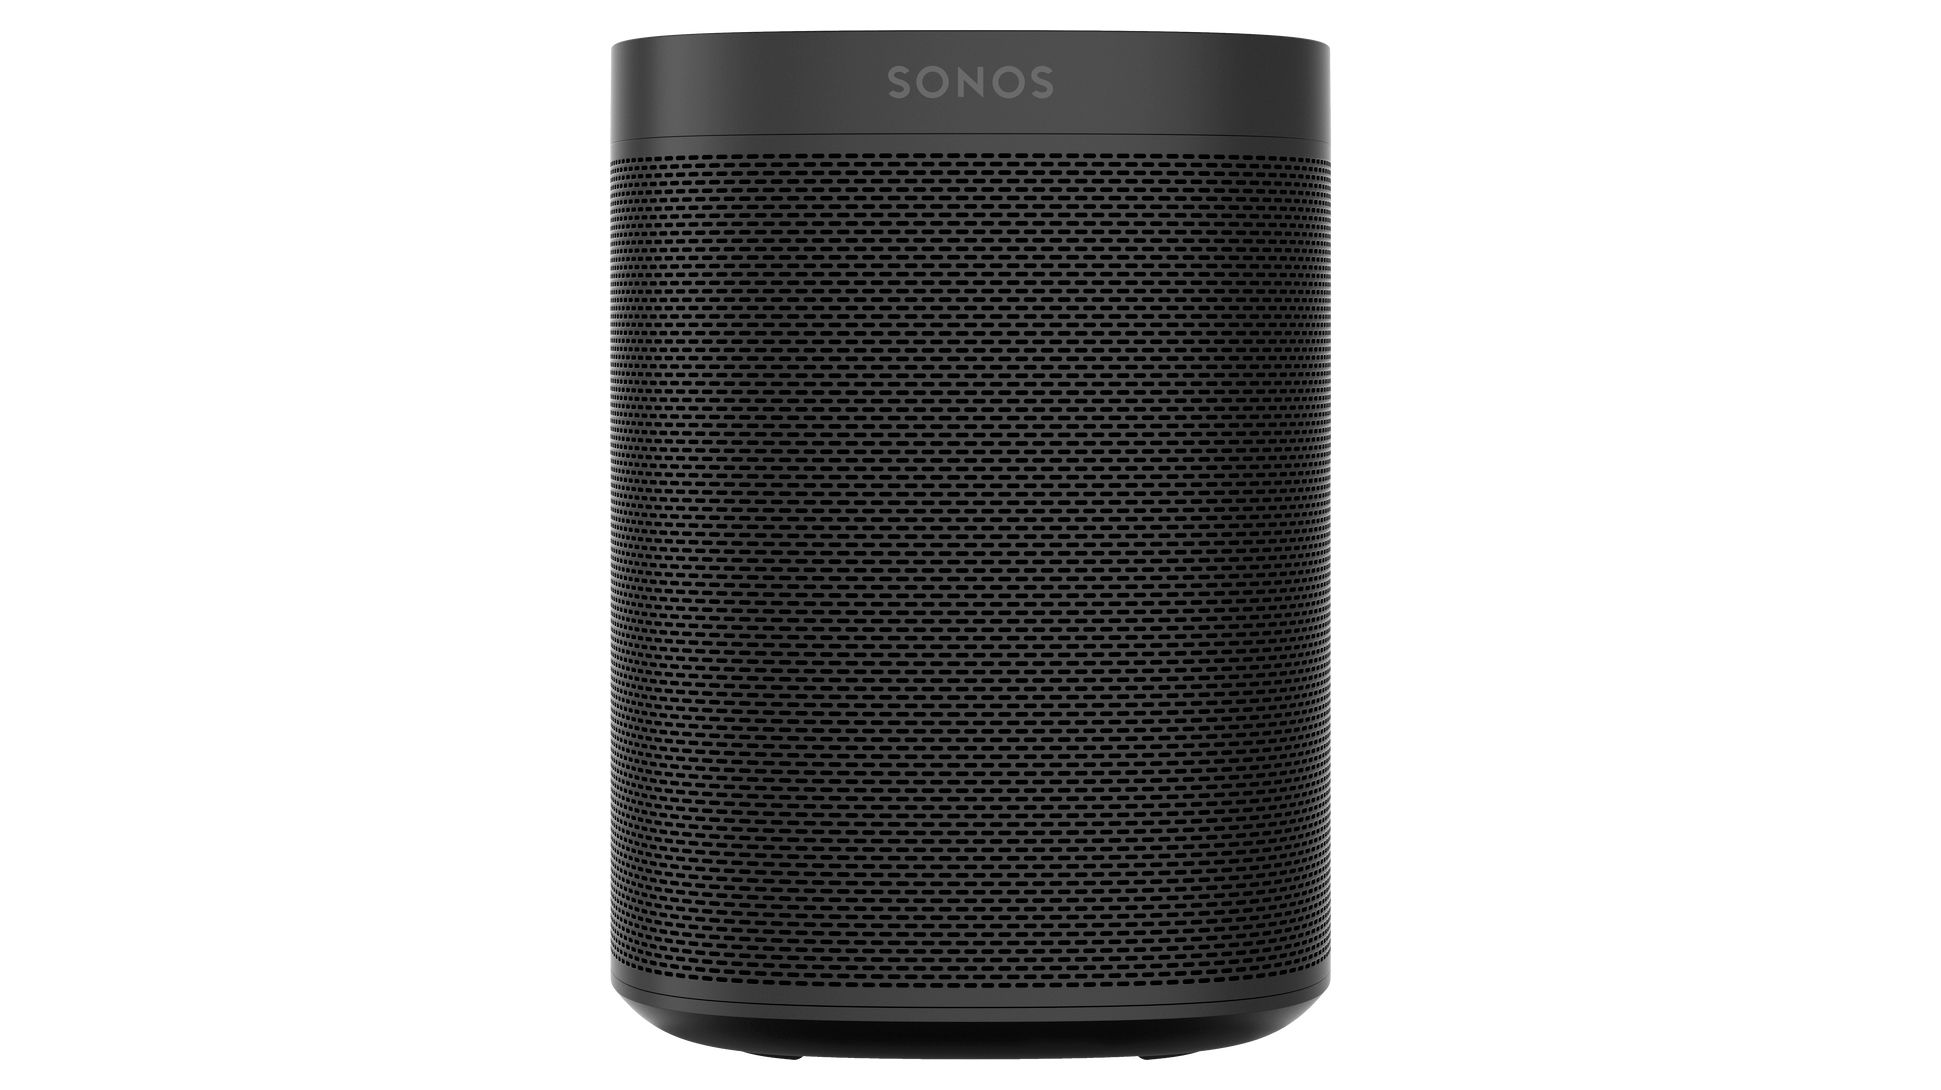 The Complete Sonos Buying Guide: Every Speaker, Soundbar and Amp